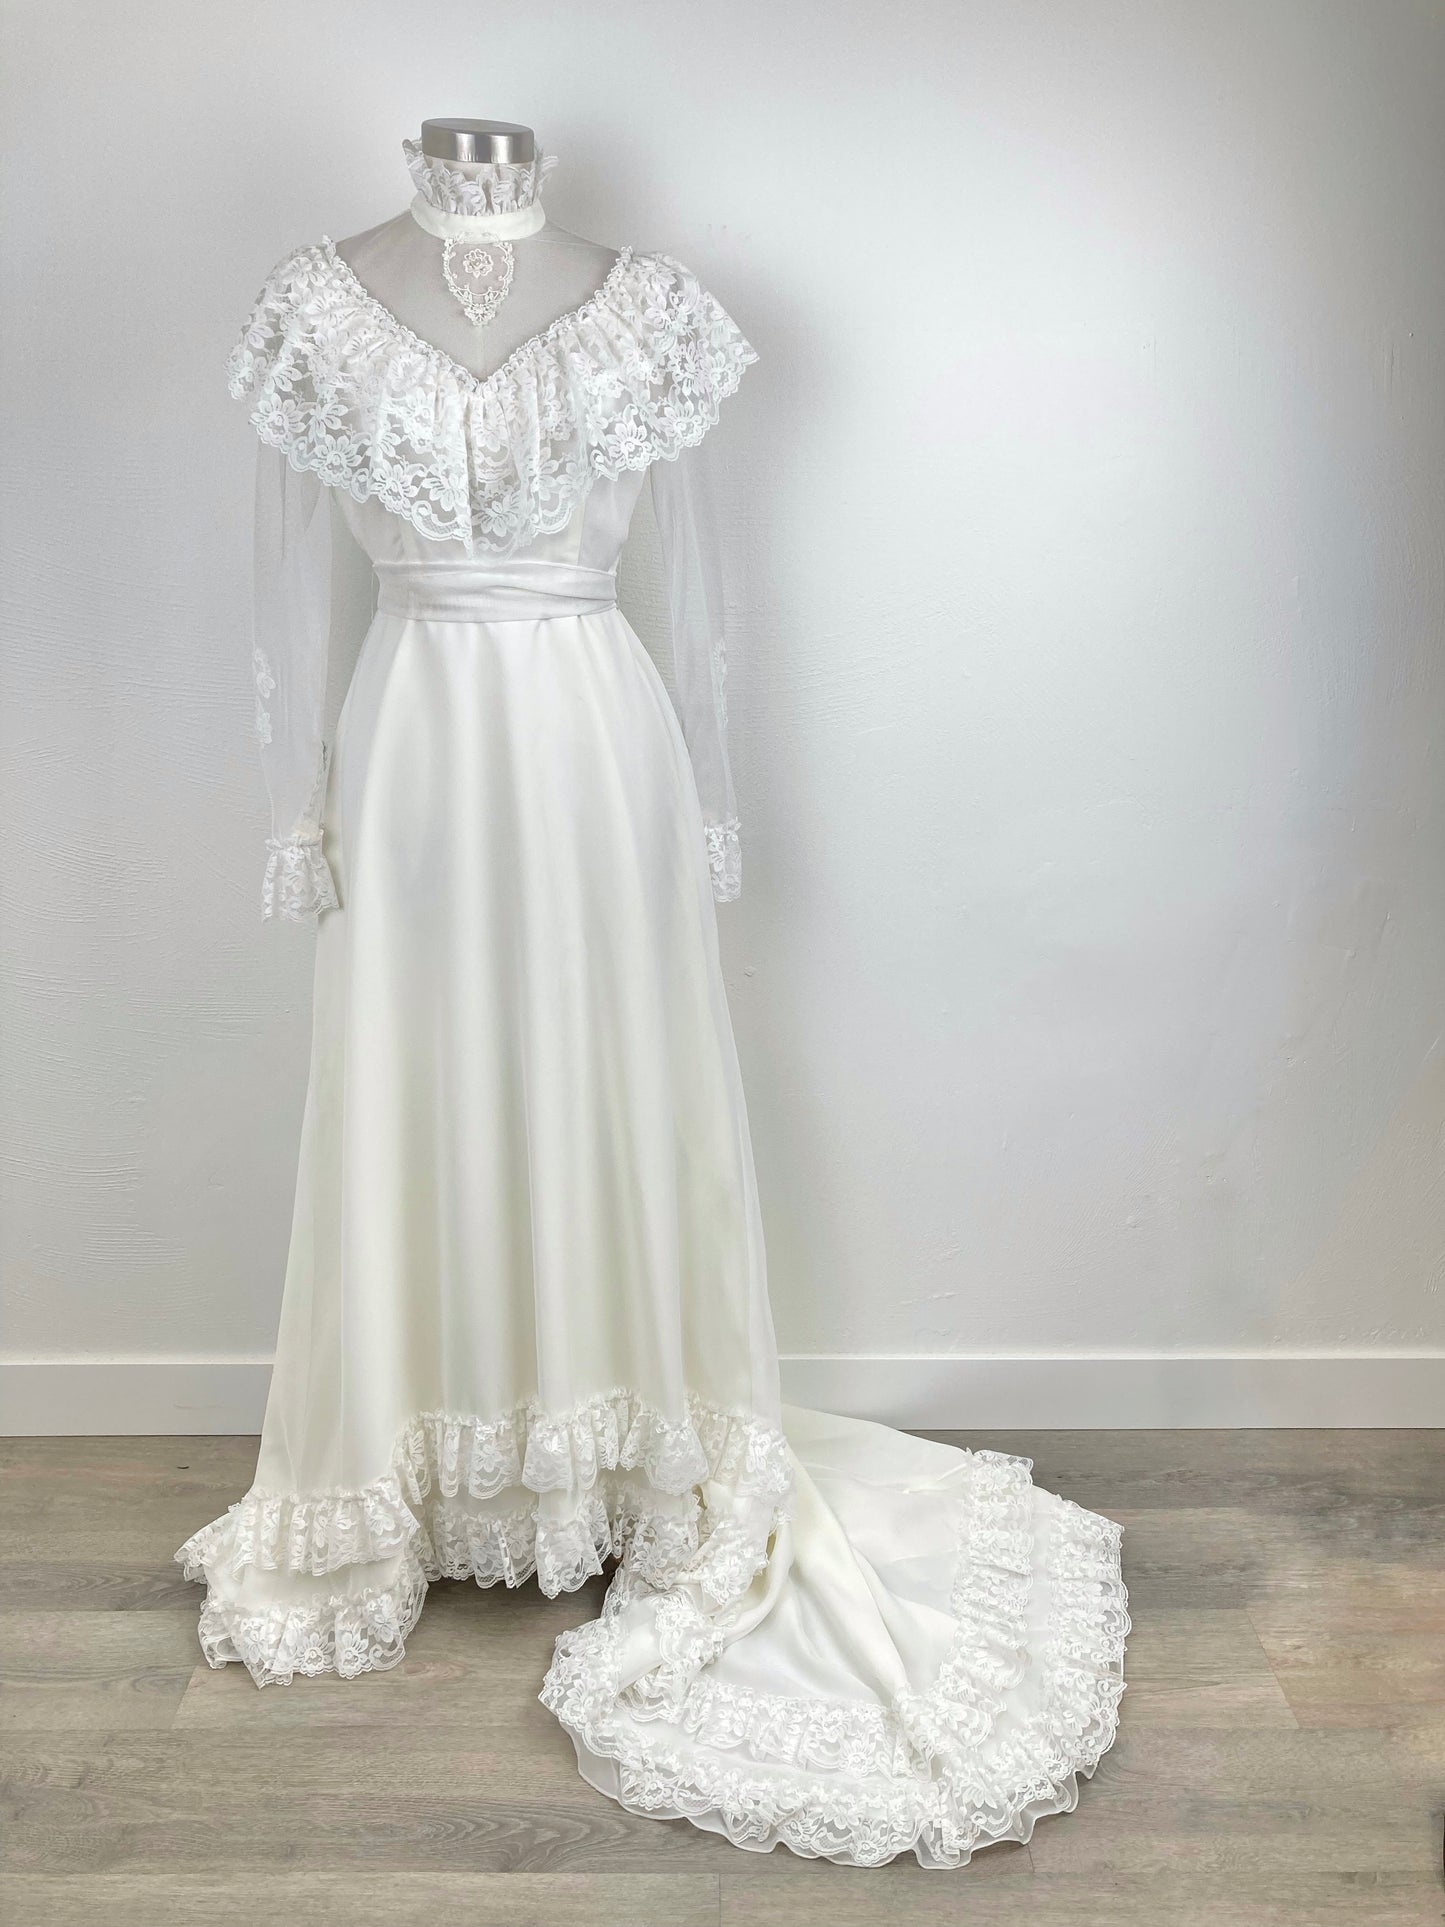 70s Chiffon and Lace Wedding Dress, 70s Bridal Gown, Victorian Style Wedding Dress, Boho "Victoria" Wedding Gown, Size M